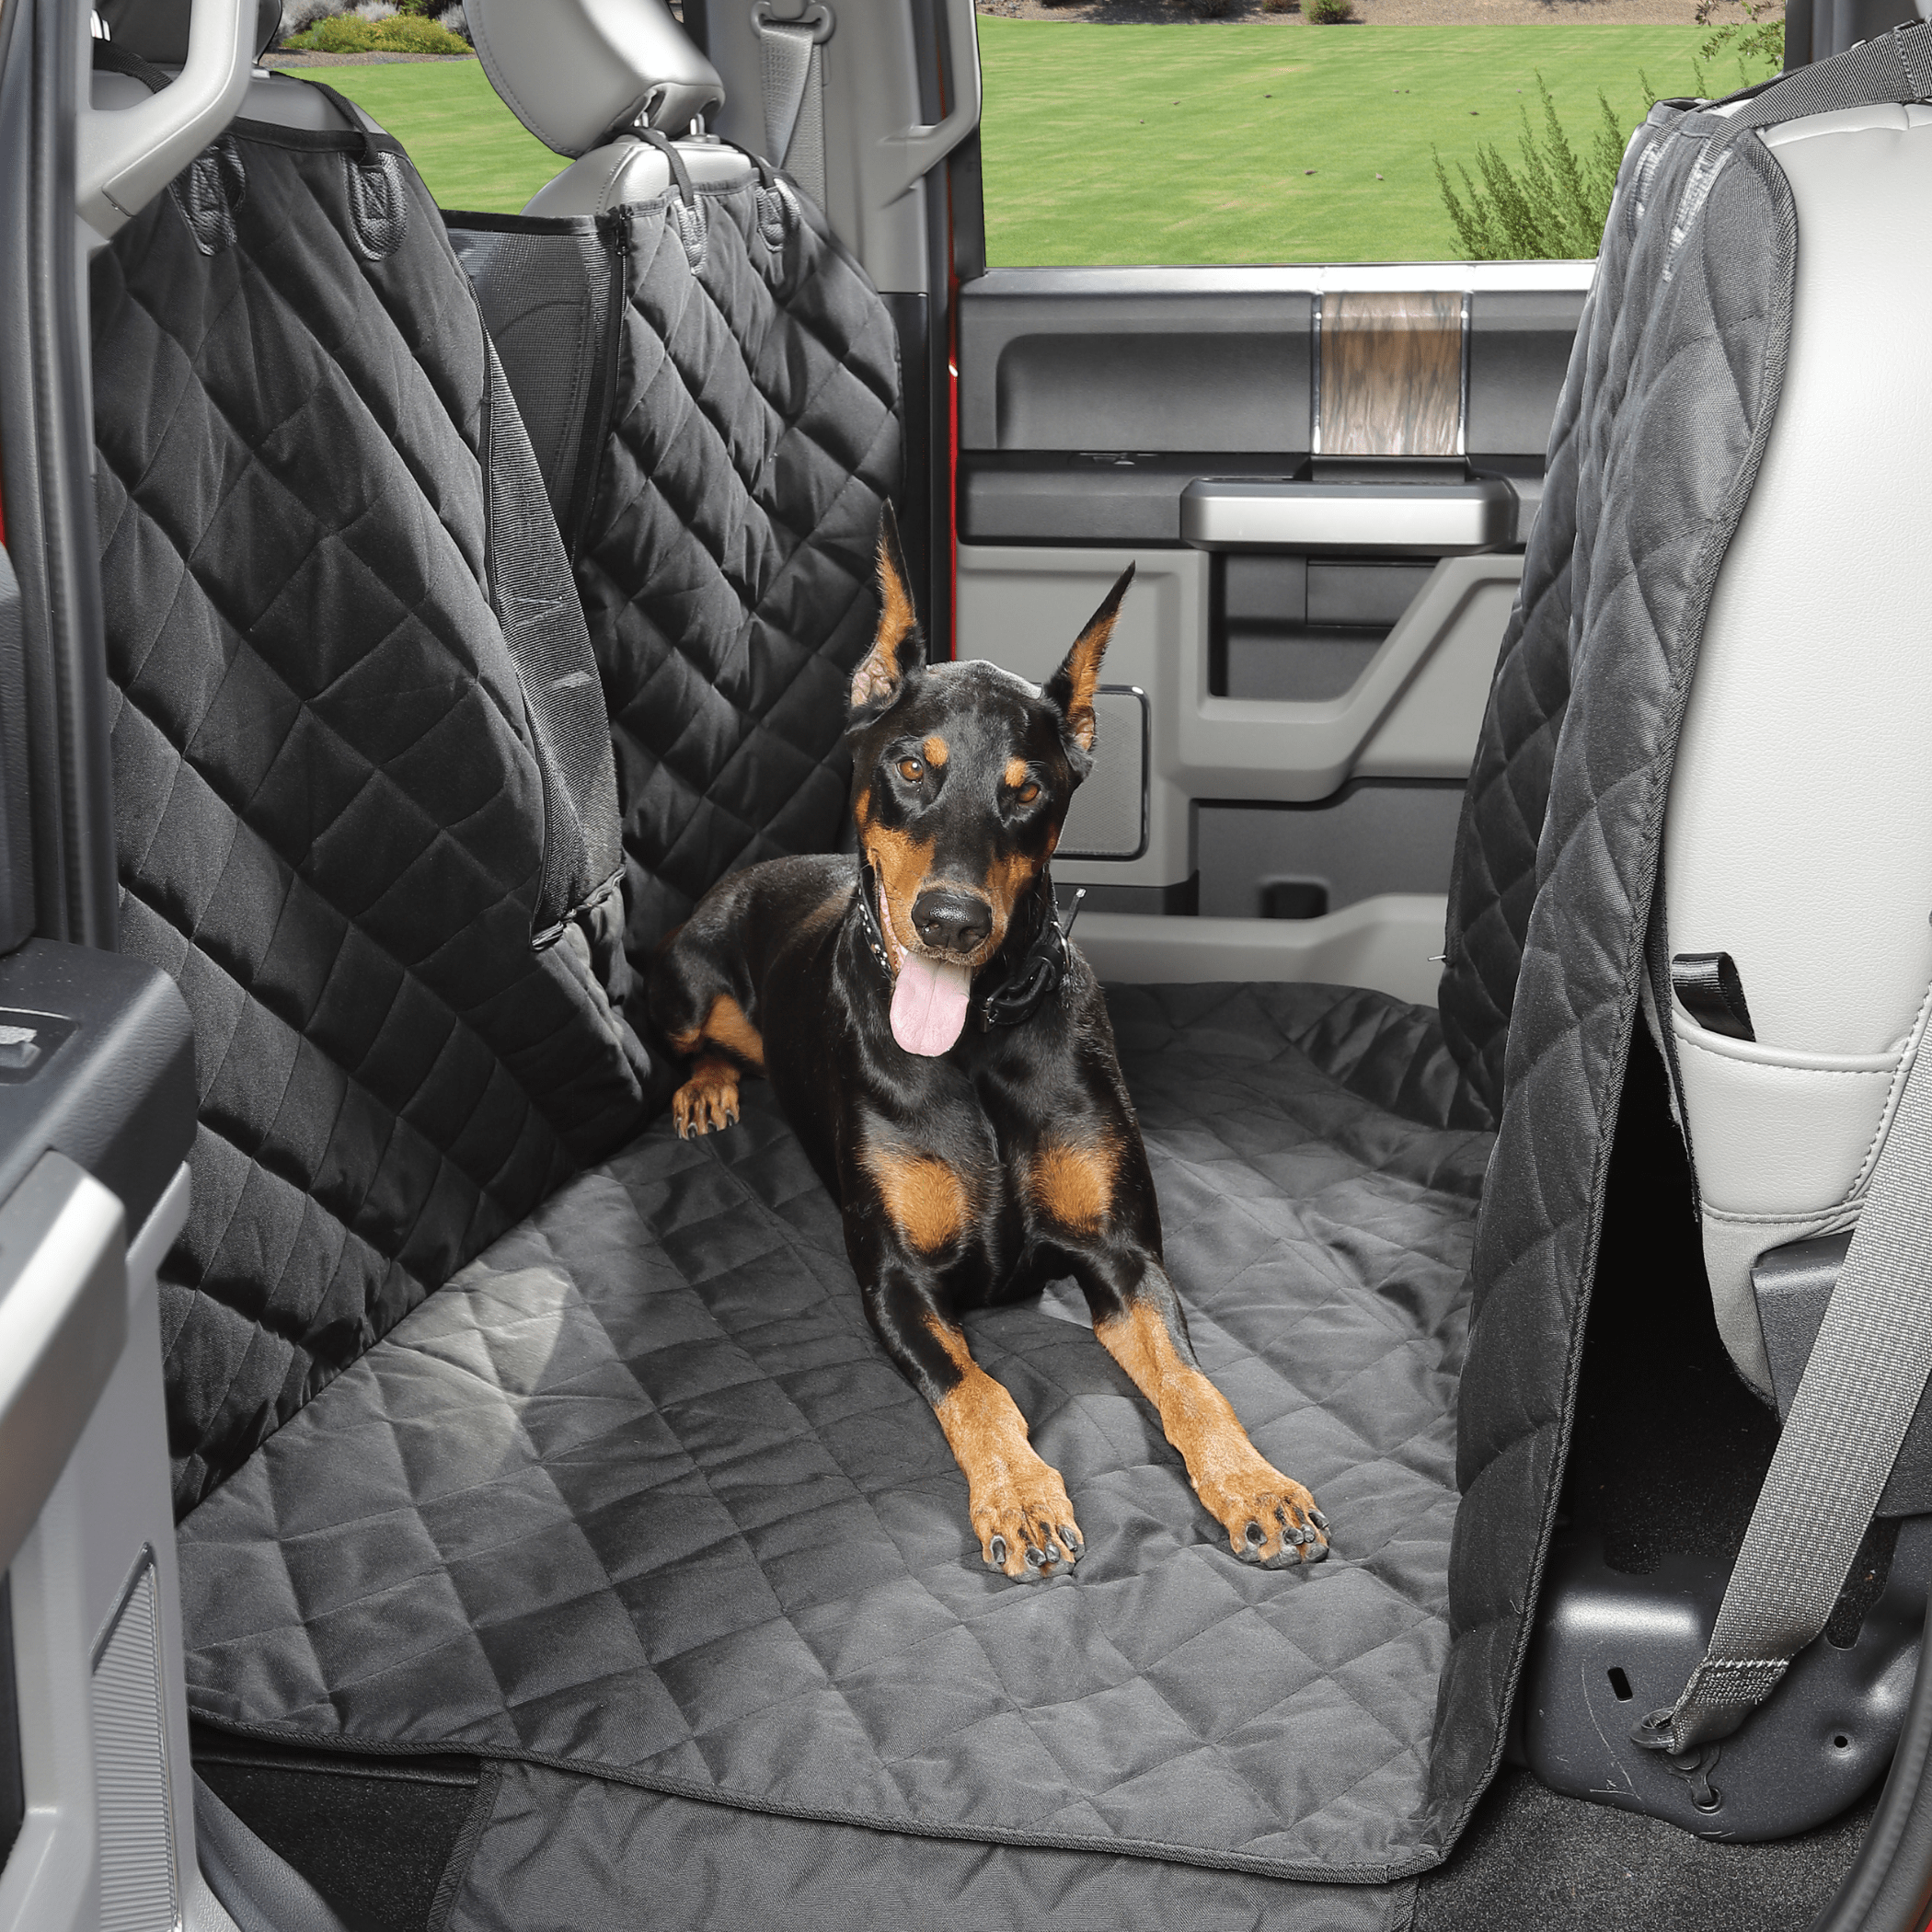 4Knines Cradles Your Pooch with New Floor Hammock for Truck Crew Cab